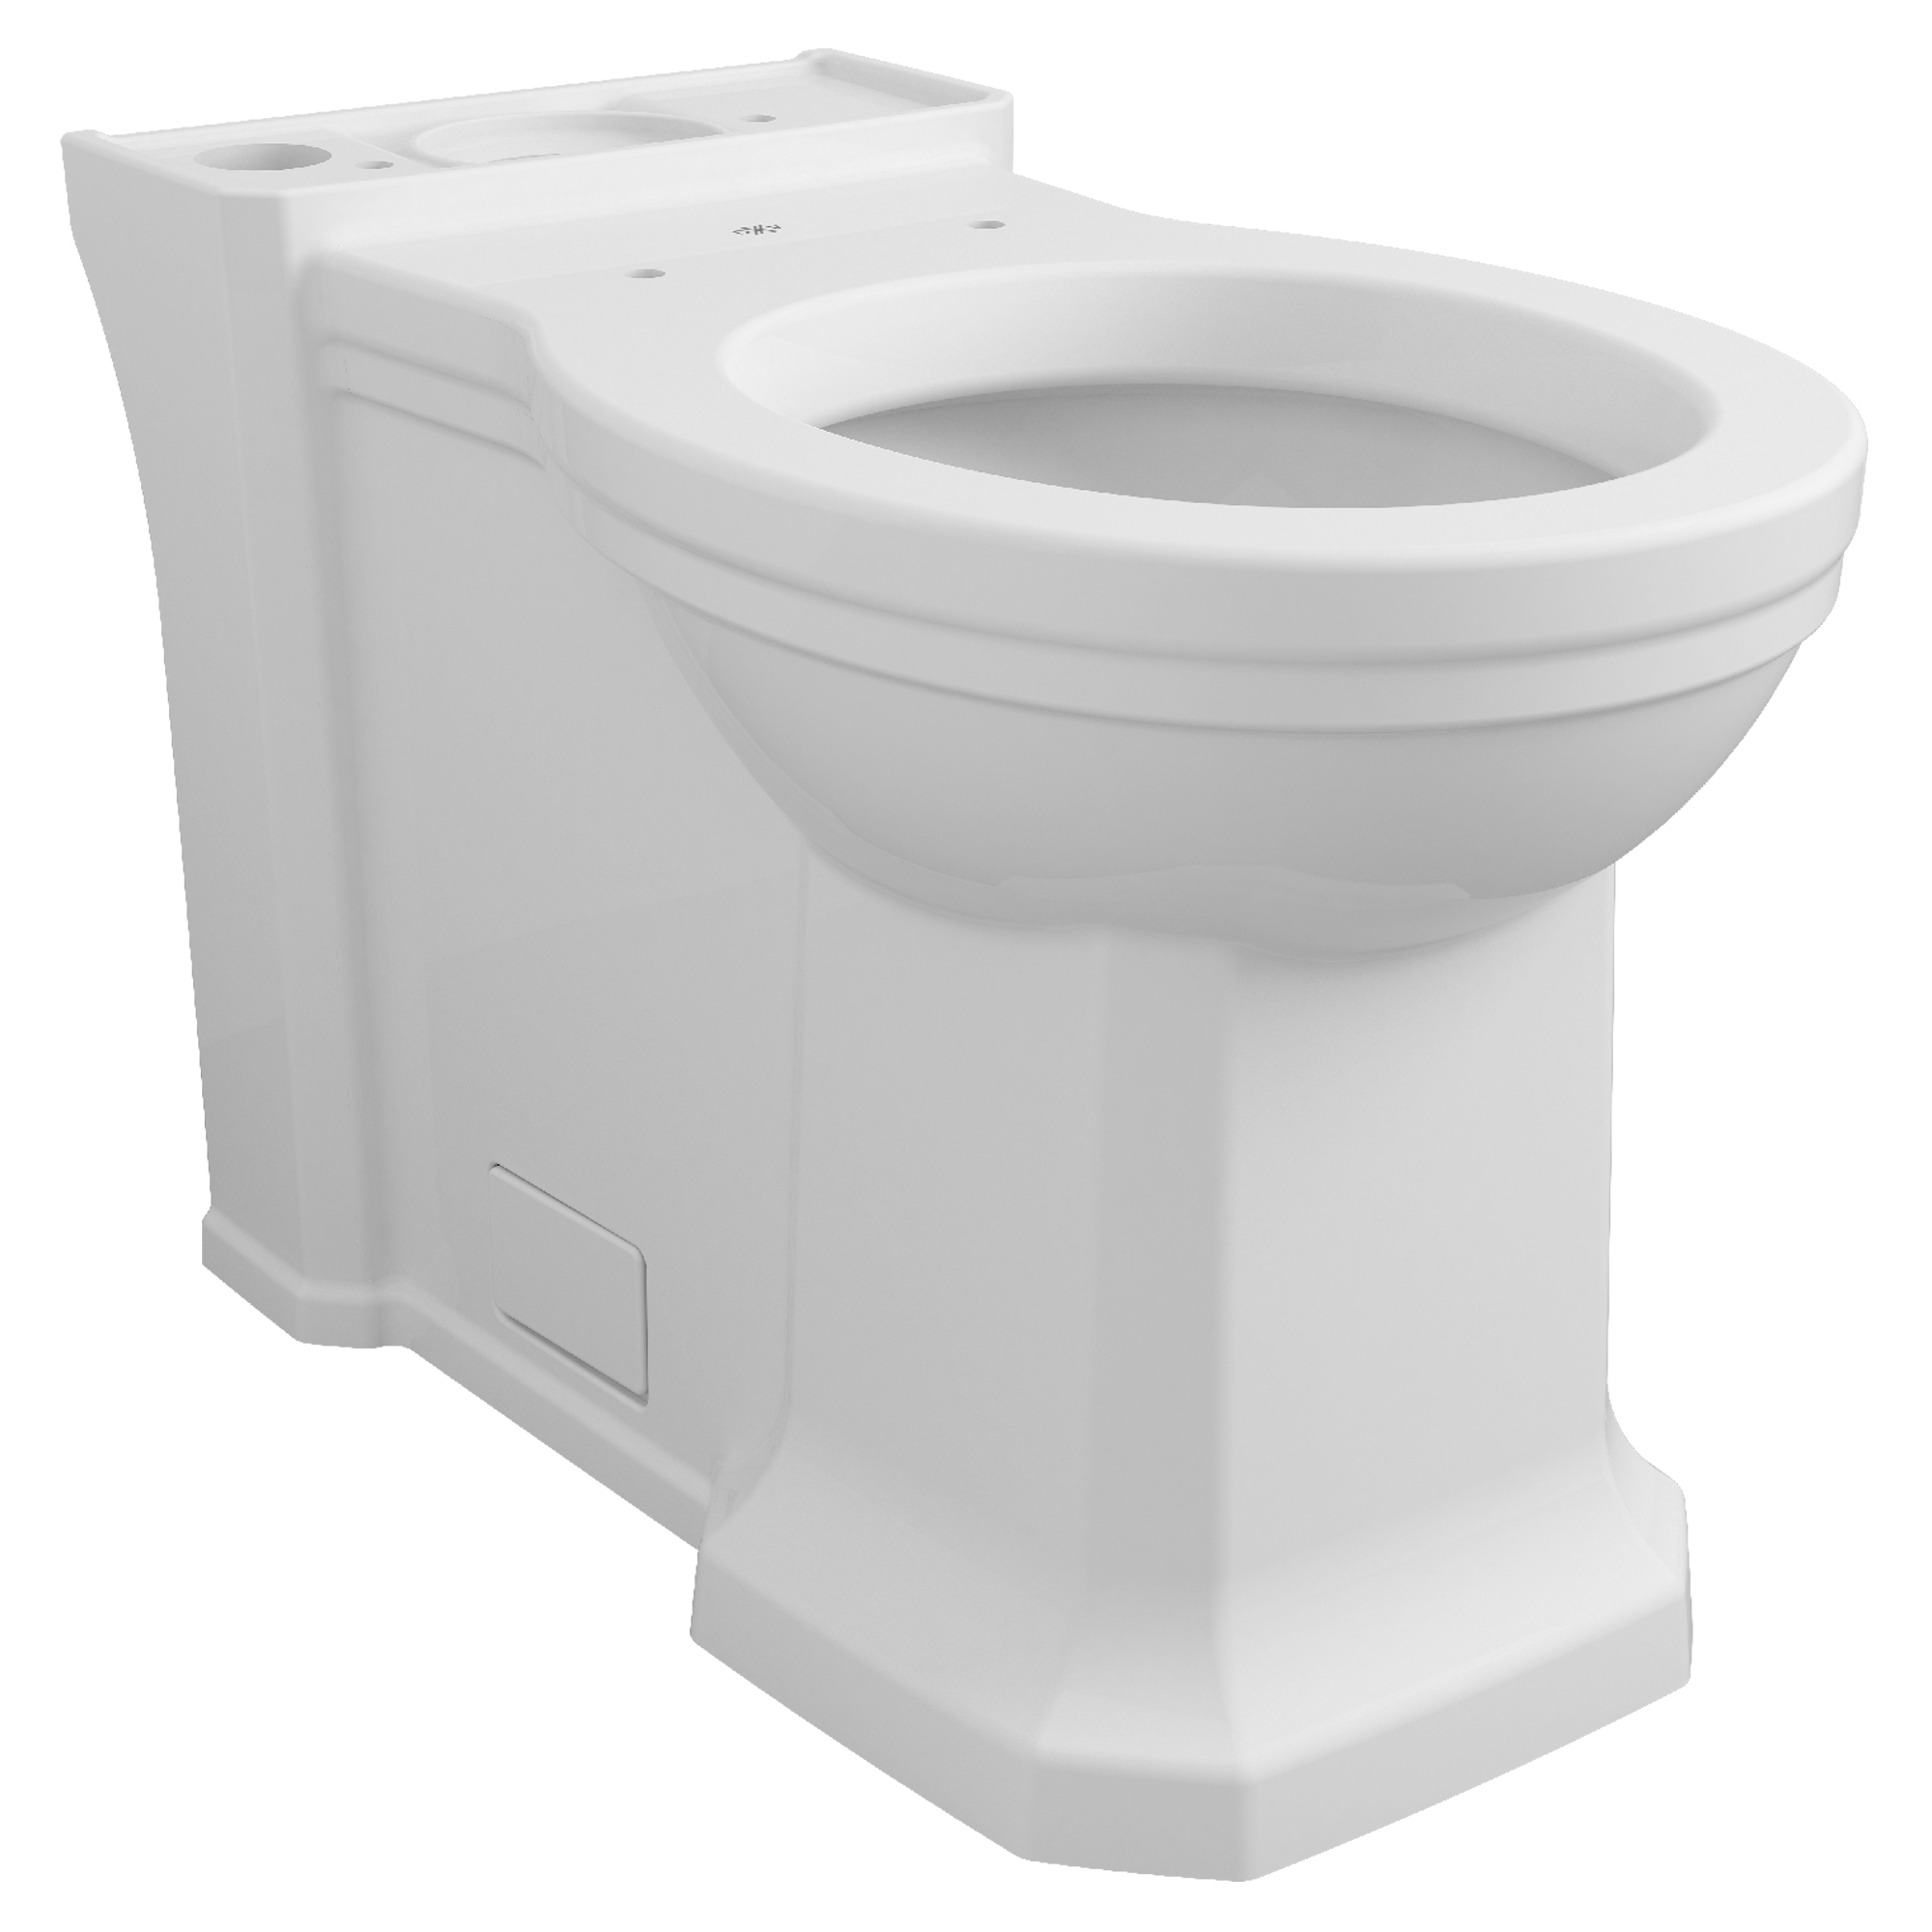 Fitzgerald® Chair Height Round Front Toilet Bowl with Seat